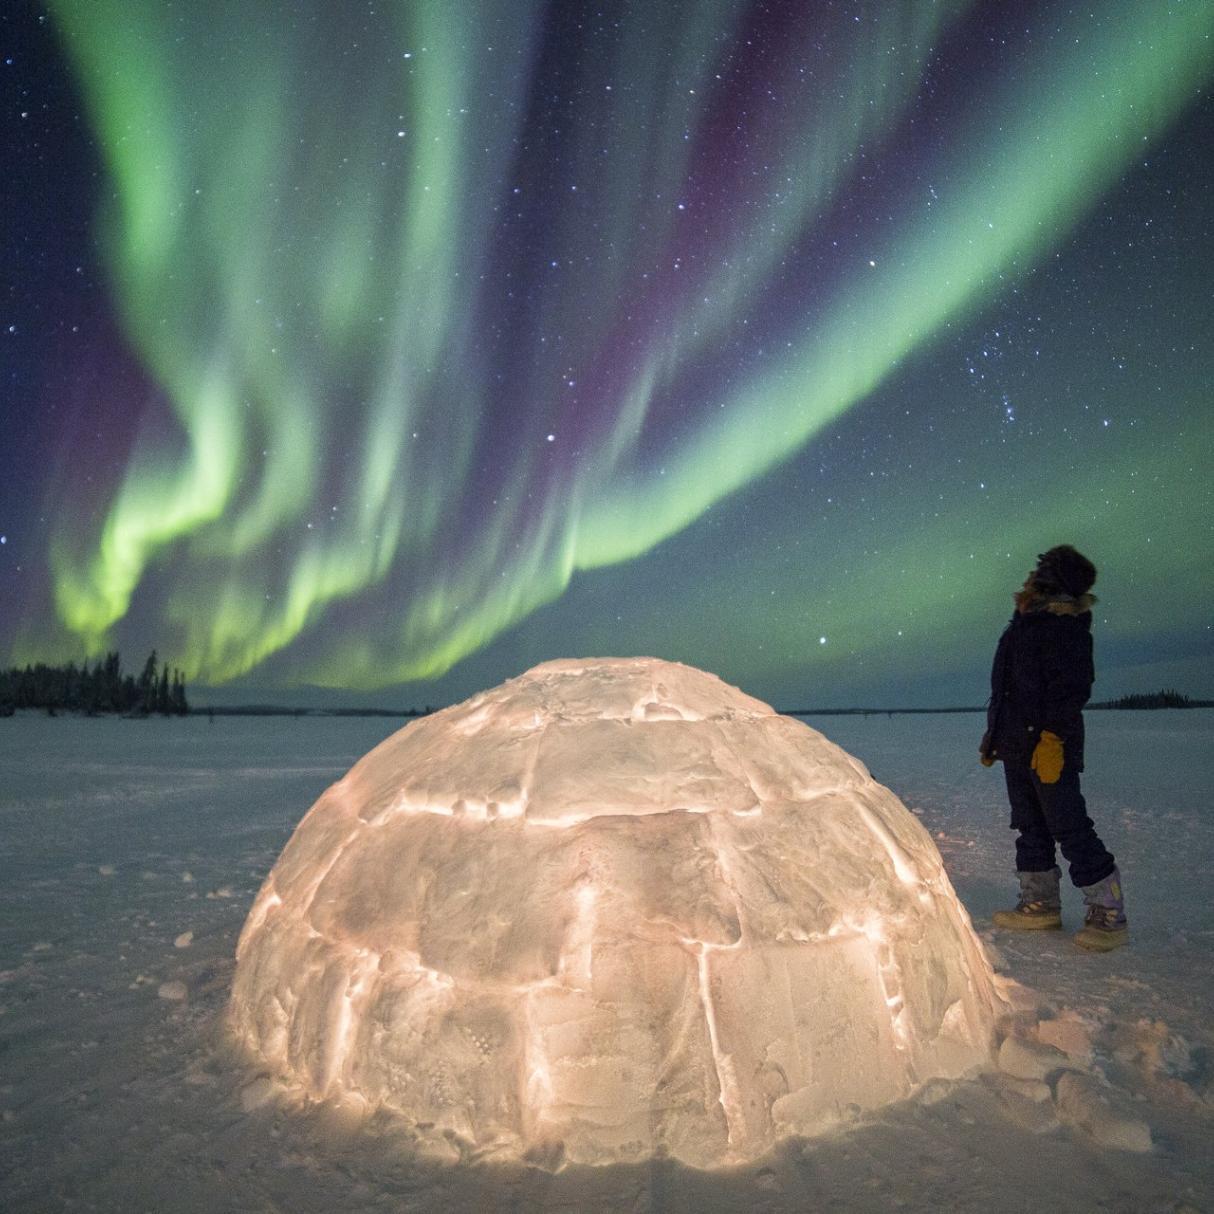 A person observes the northern lights next to an igloo